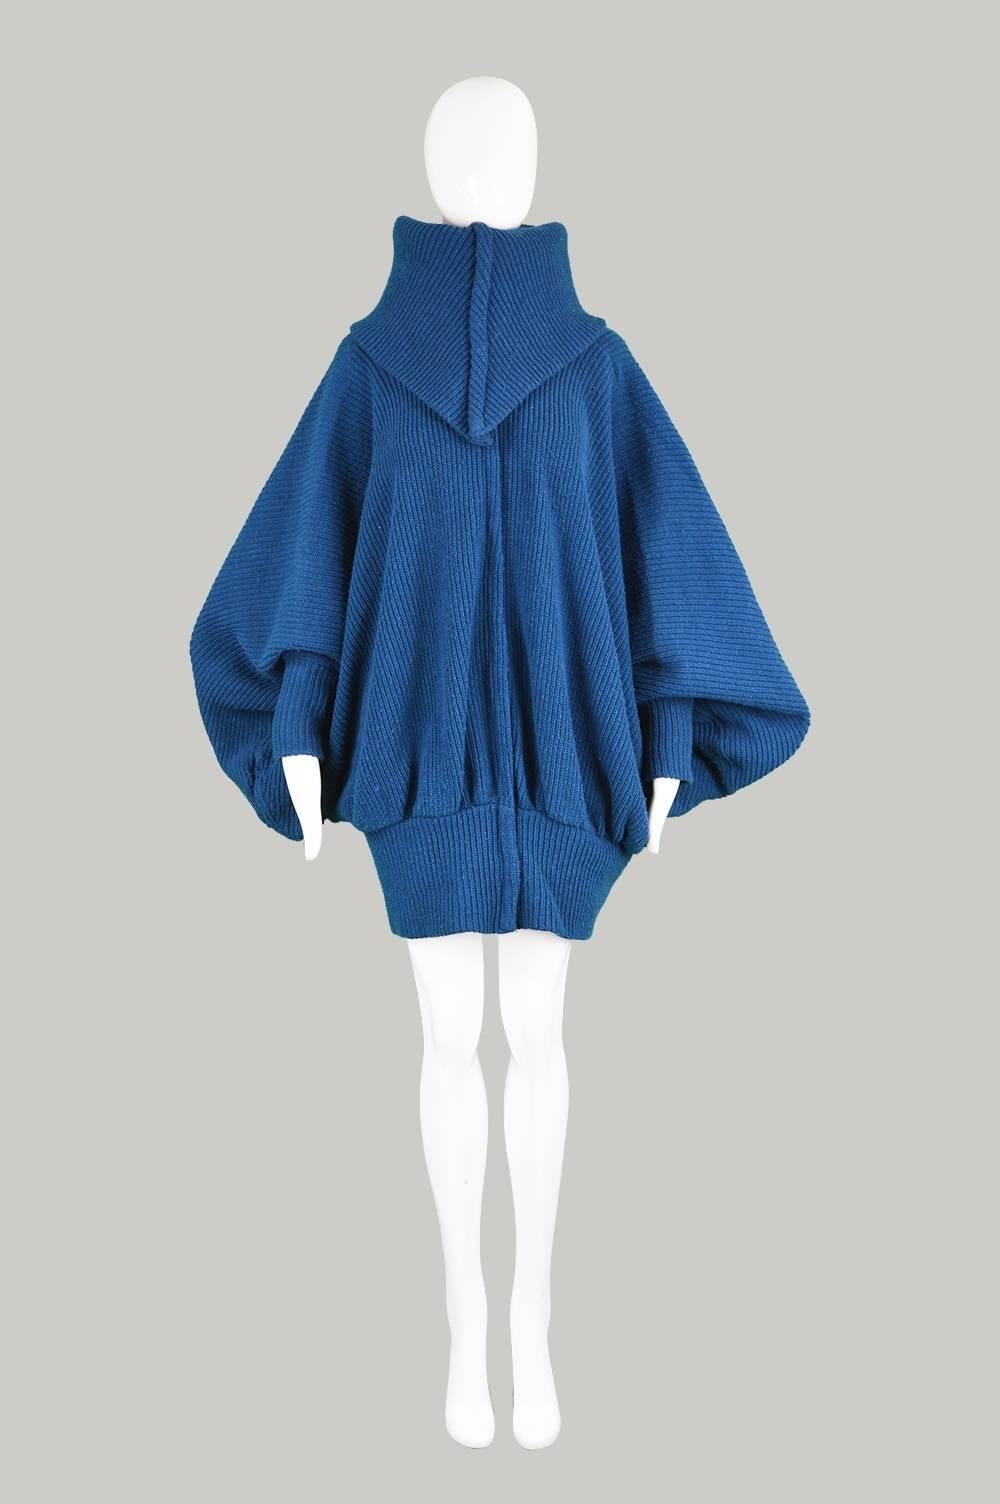 An incredible avant garde vintage batwing jacket from the 1980s by highly collectible and genius designer, Norma Kamali, for one of her earlier labels. In a ribbed chunky knit fabric with a dramatic, draped effect created by the extreme batwing -